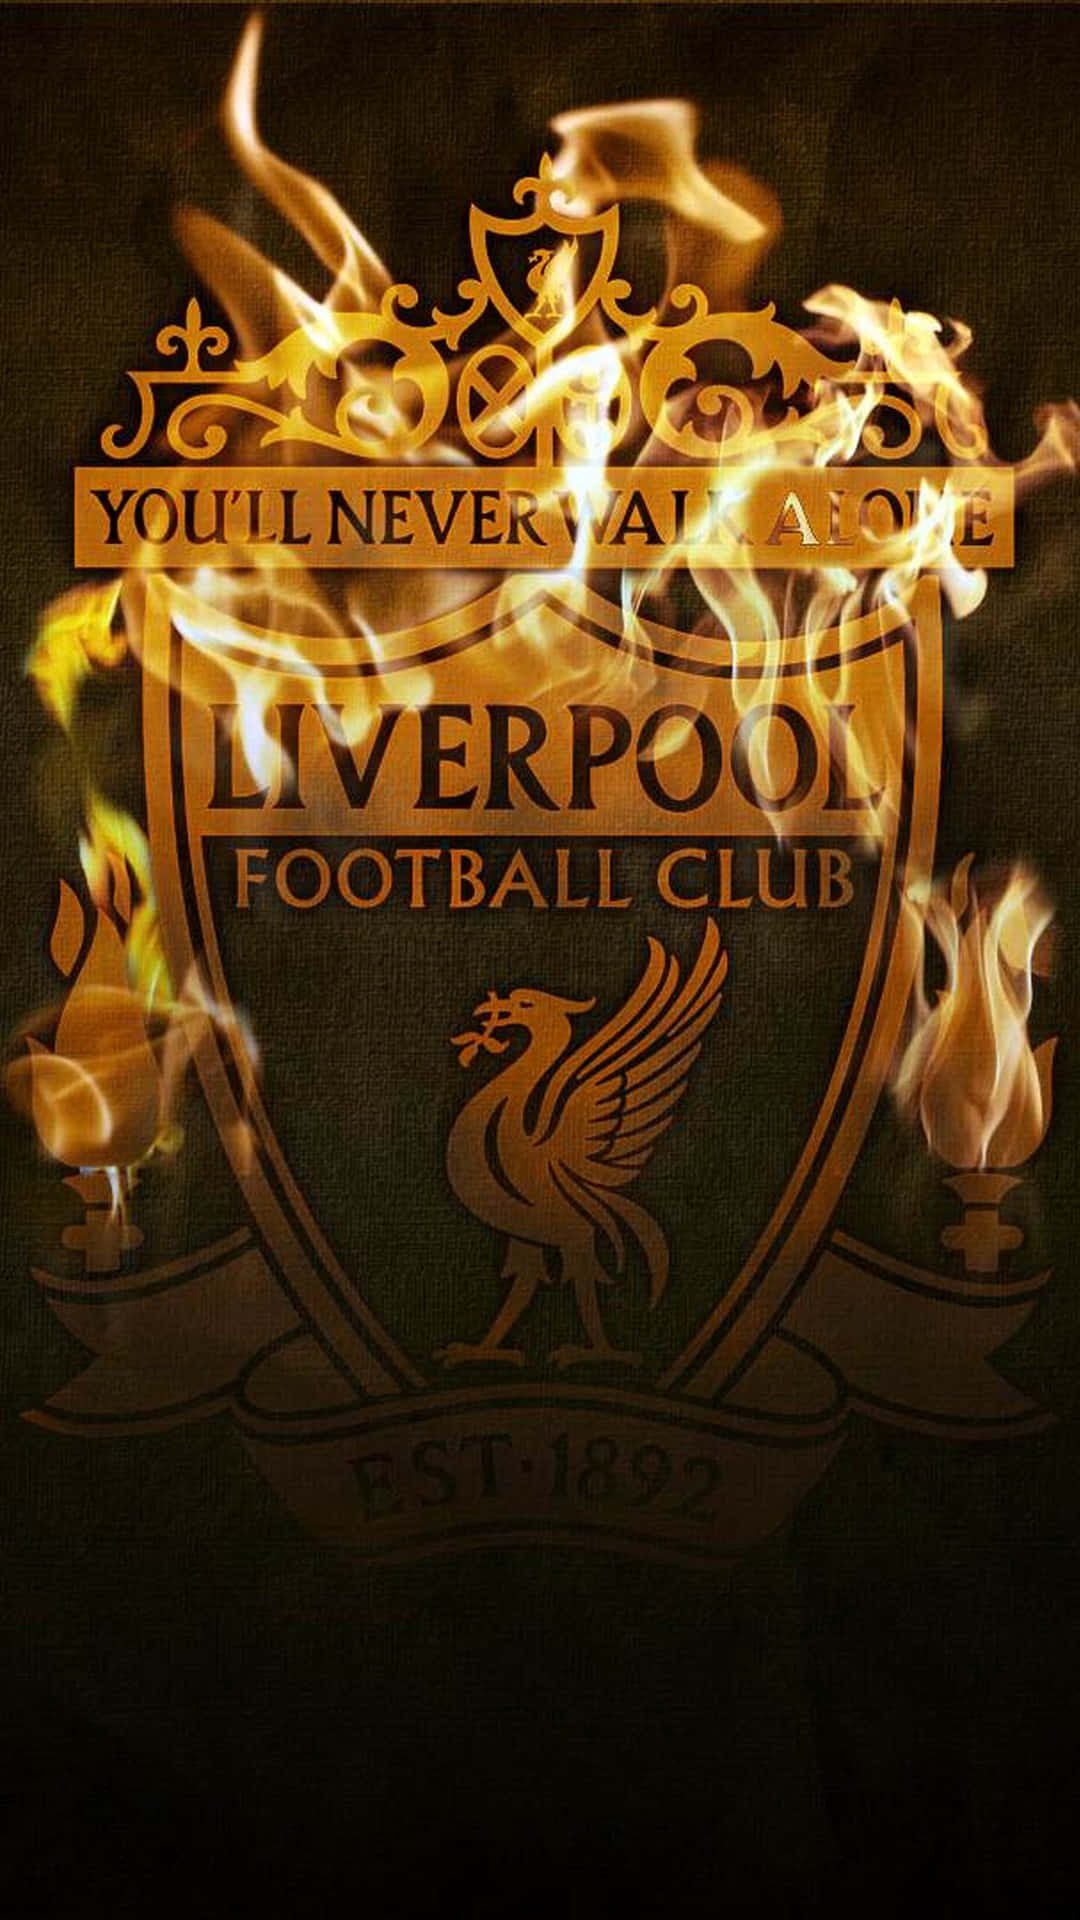 Show Your Support for Liverpool with an iPhone Wallpaper